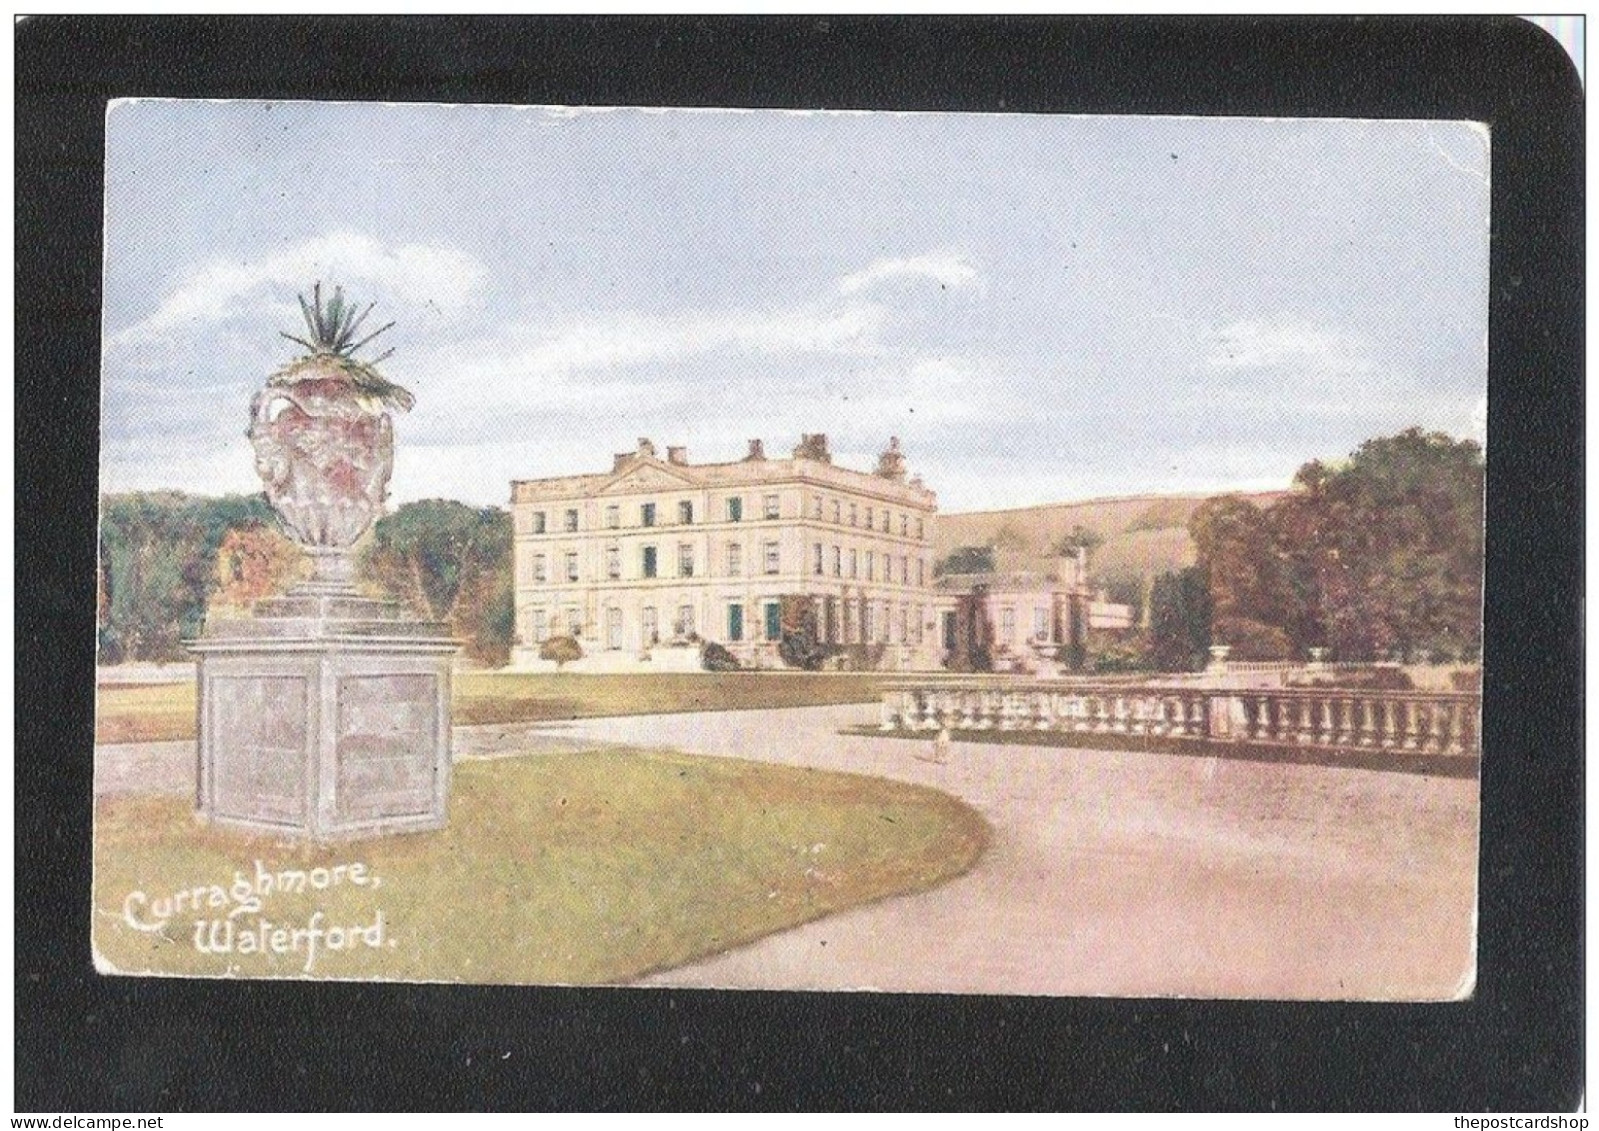 CURRAGHMORE WATERFORD COUNTY WATERFORD IRISH IRELAND USED 1906 LIVERPOOL MESSAGE AND ADDRESS FADED AWAY - Waterford